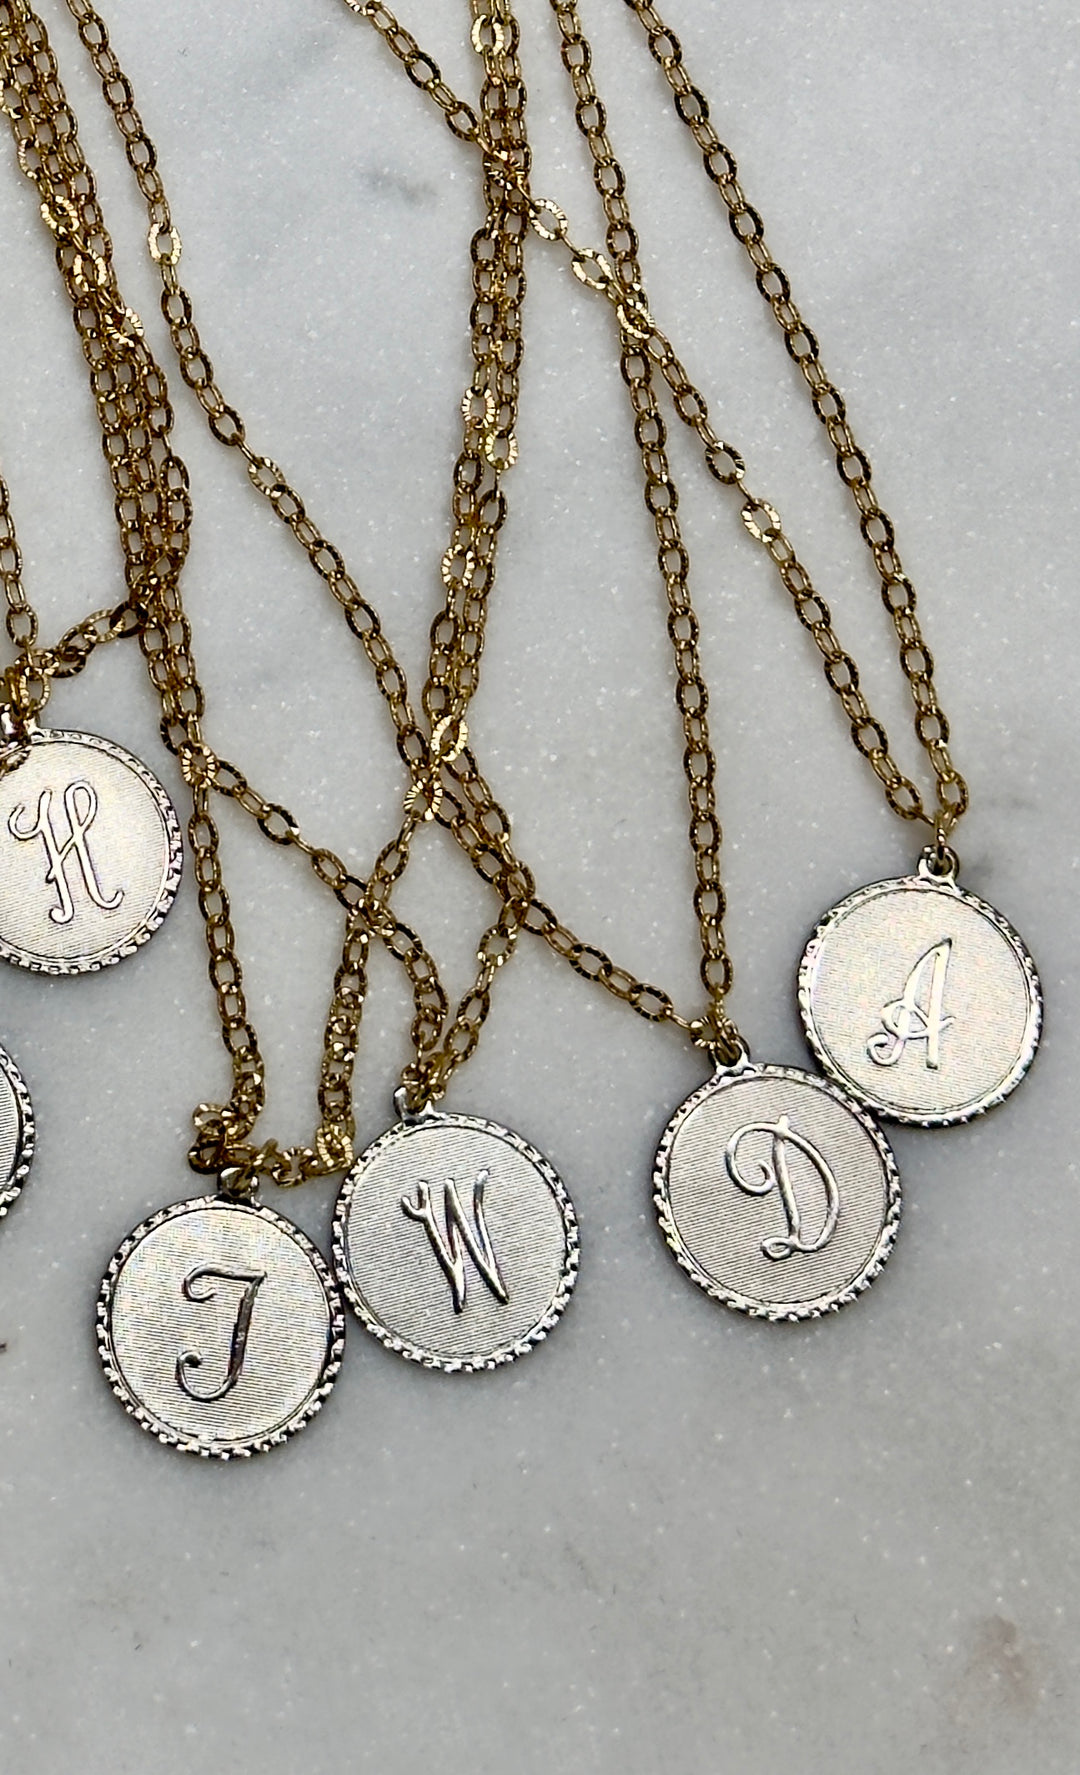 Personalized Mixed Metal Initial Charm Necklace